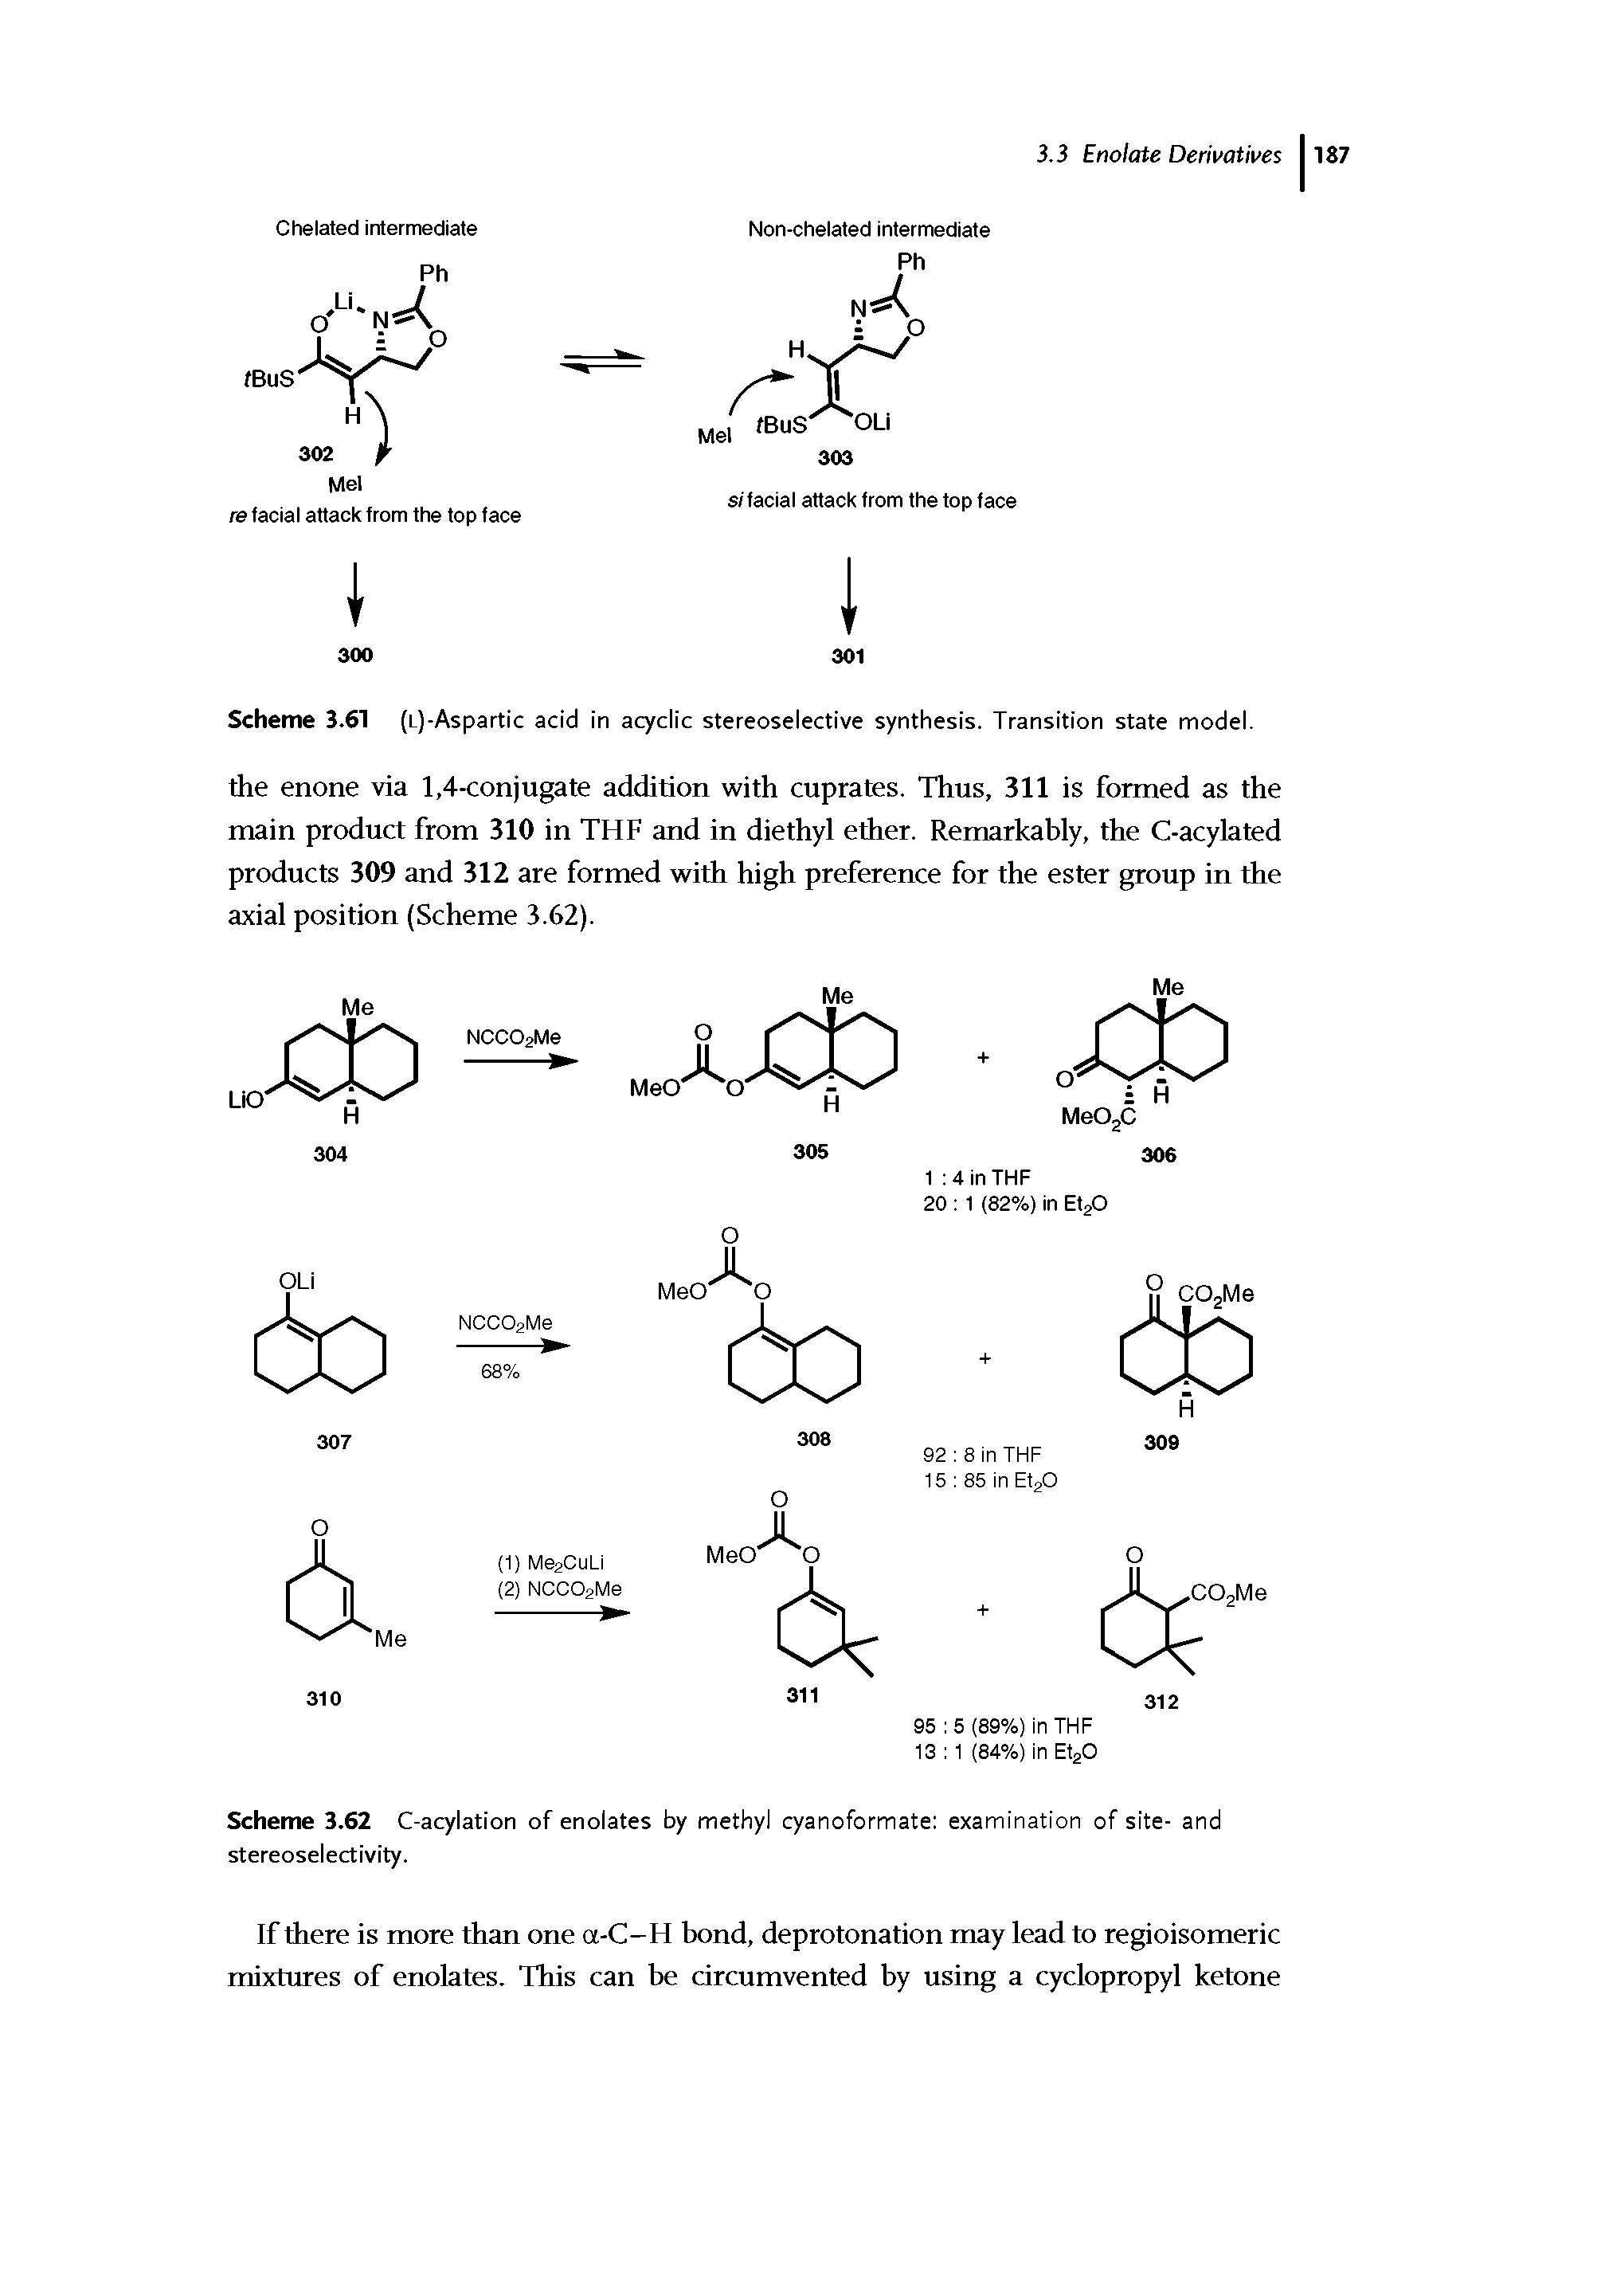 Scheme 3.62 C-acylation of enolates by methyl cyanoformate examination of site- and stereoselectivity.